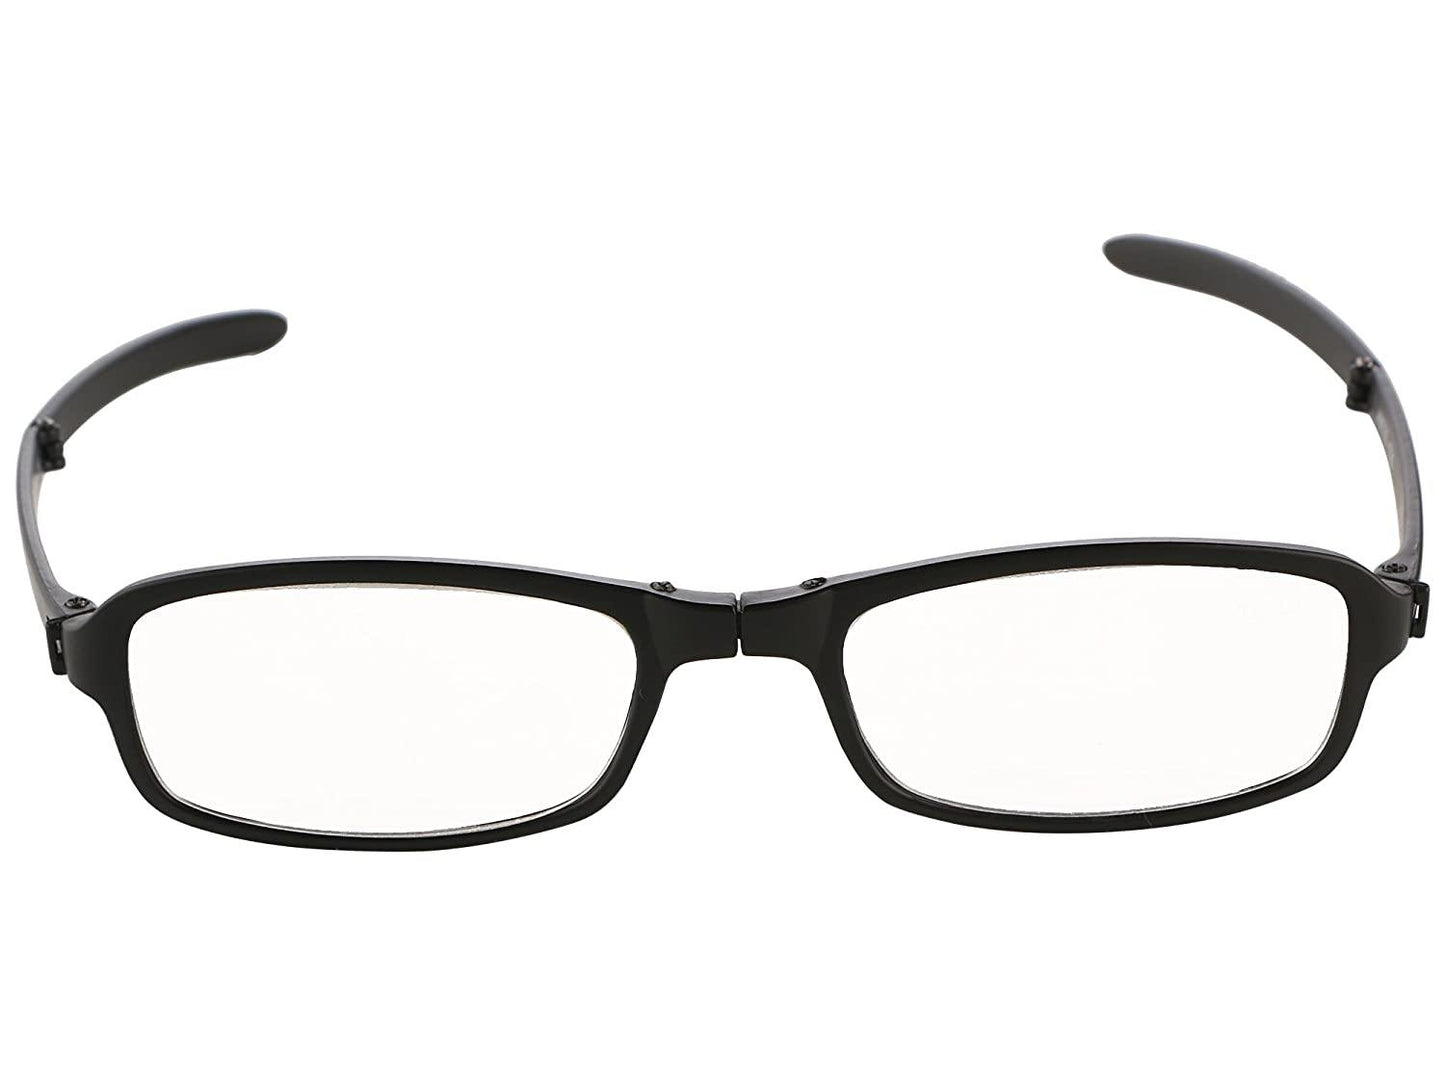 Black Folding Reading Glasses with Pocket Zip Cover - Glasses India Online